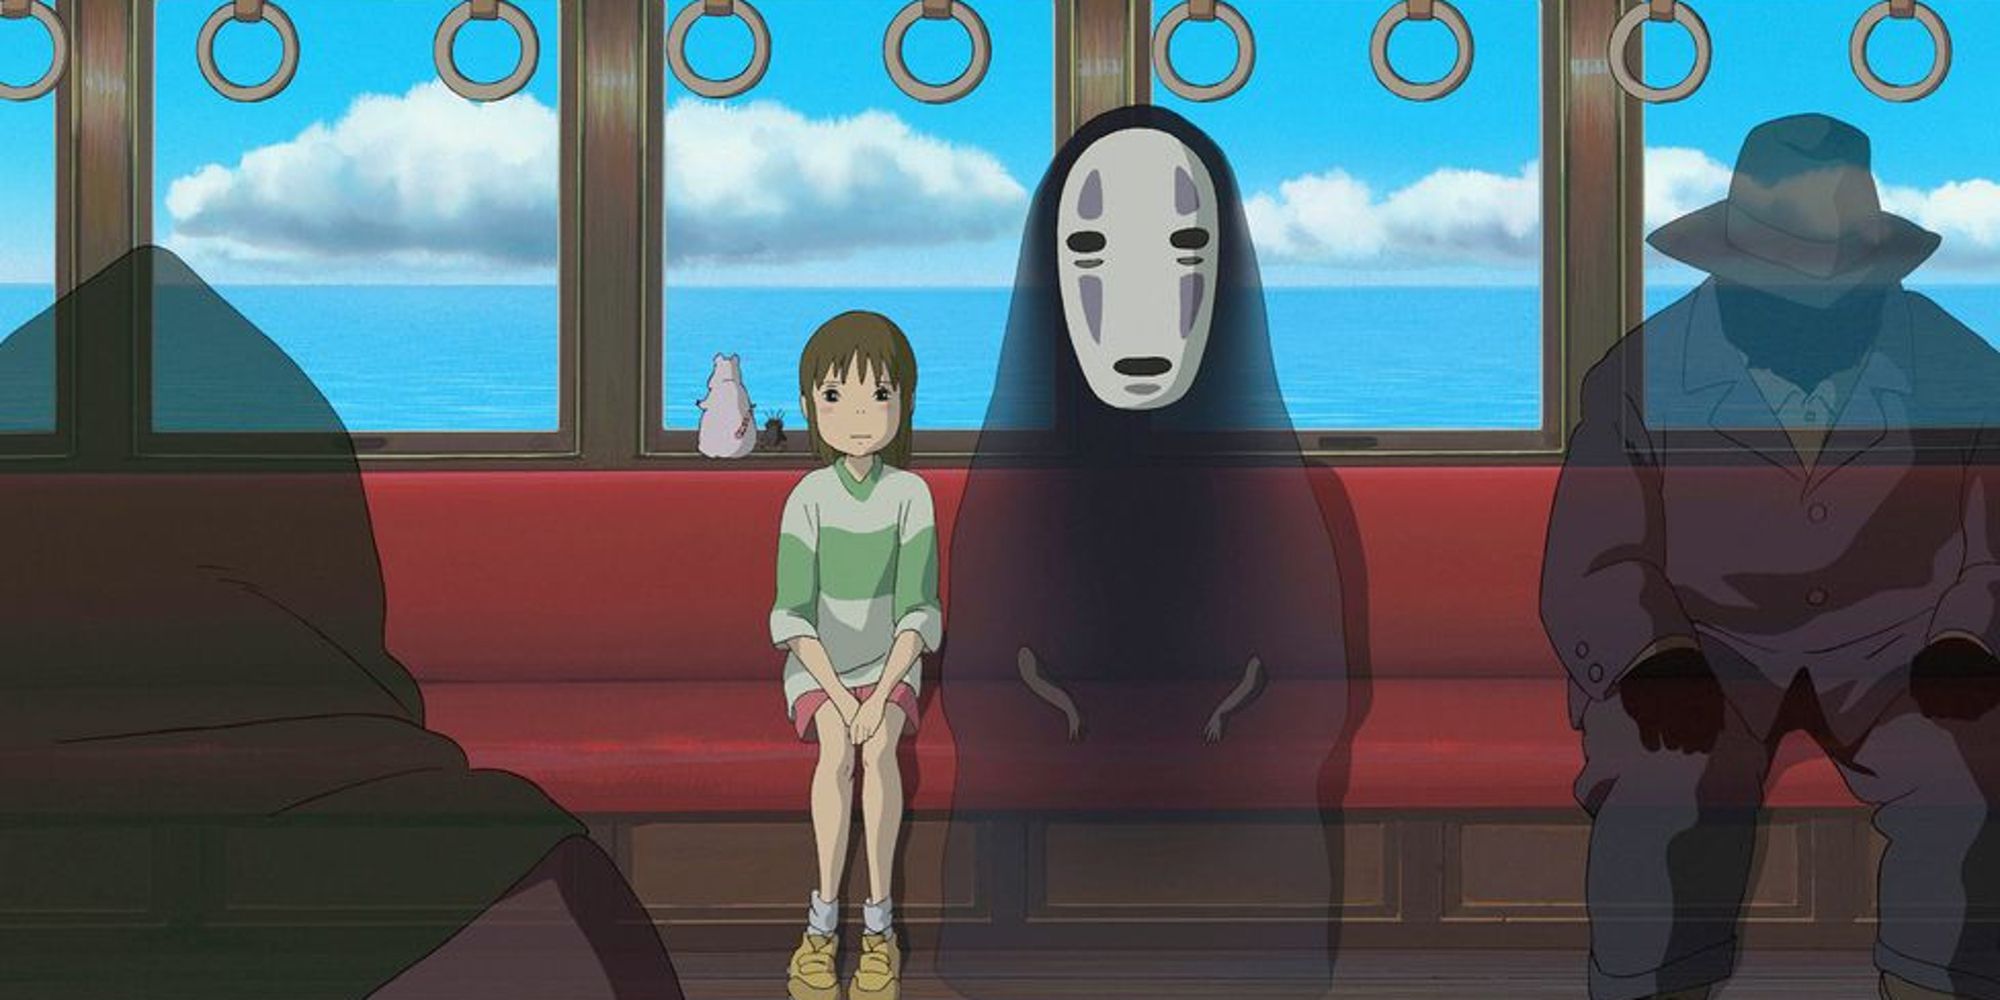 Chihiro and No-Face from 'Spirited Away' sitting among spirits in a train